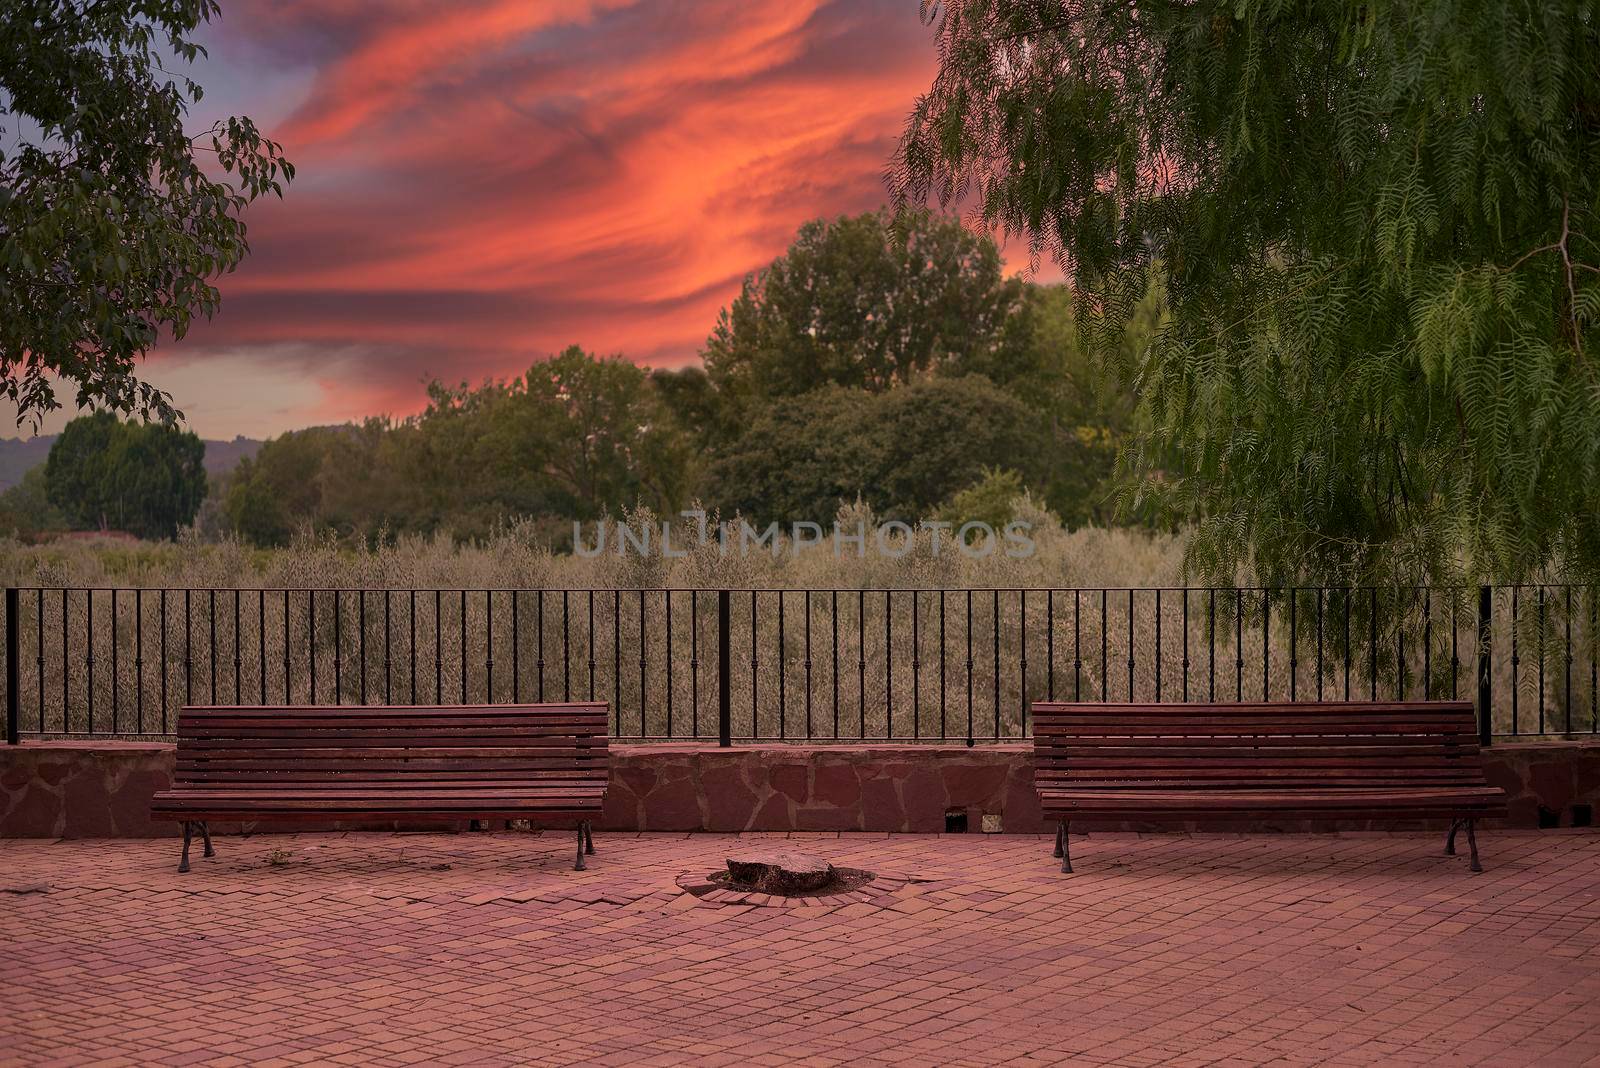 Two solitary benches in a park at sunset among trees. Empty space, orange sunset, symmetry, willow tree.